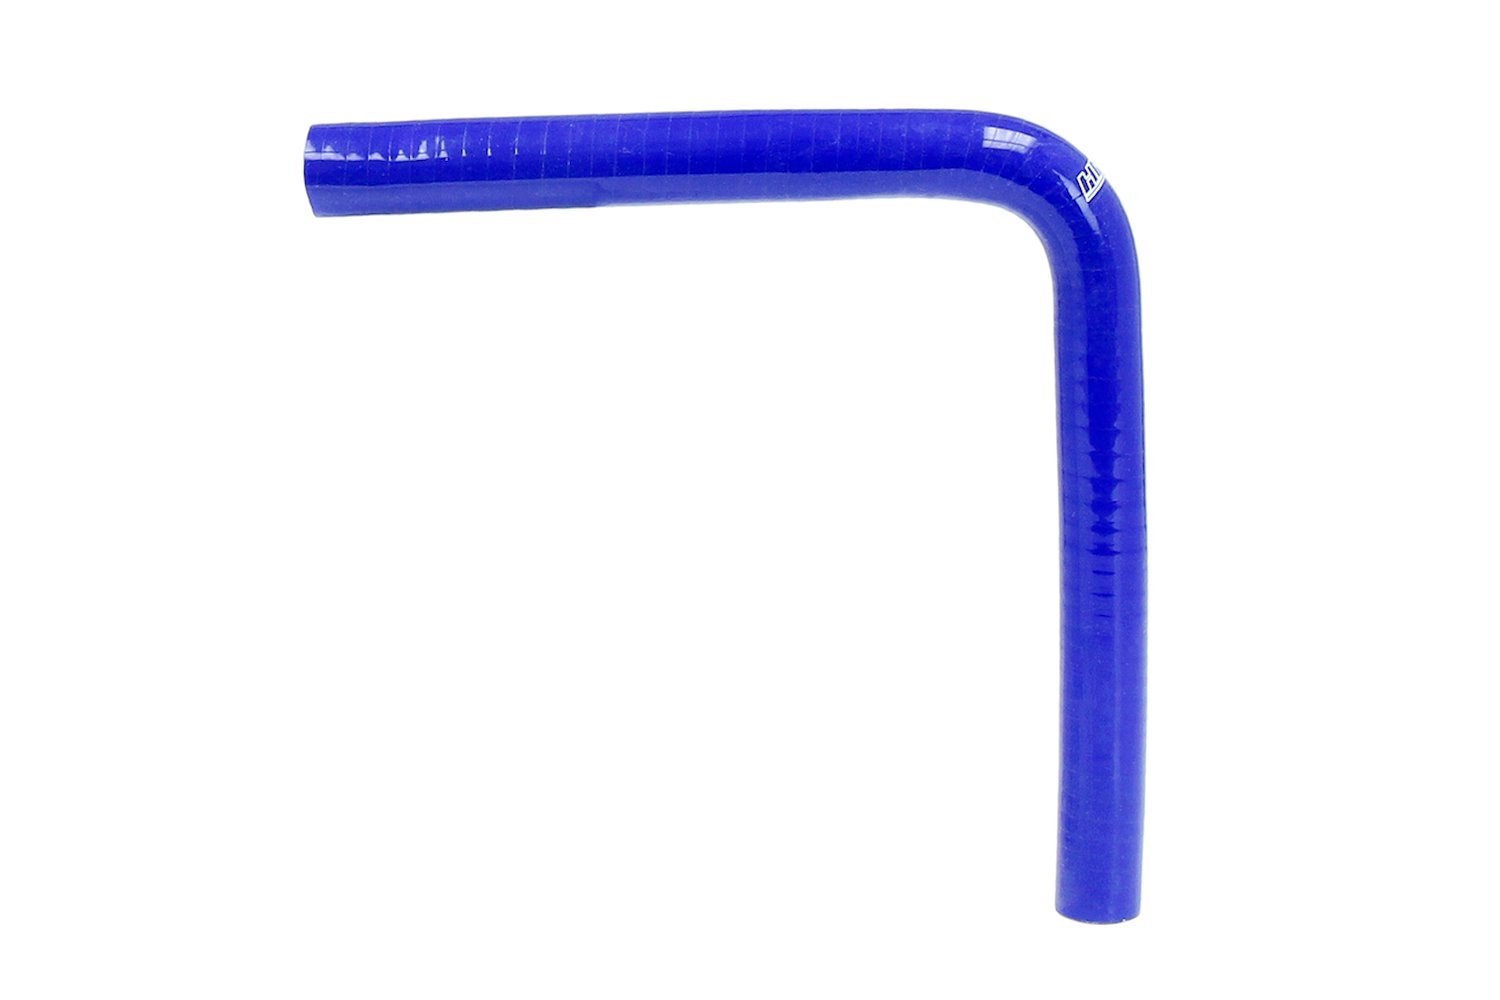 HTSEC90-032-BLUE Silicone 90-Degree Elbow Coupler Hose, High-Temp 4-Ply Reinforced, 5/16 in. ID, Blue